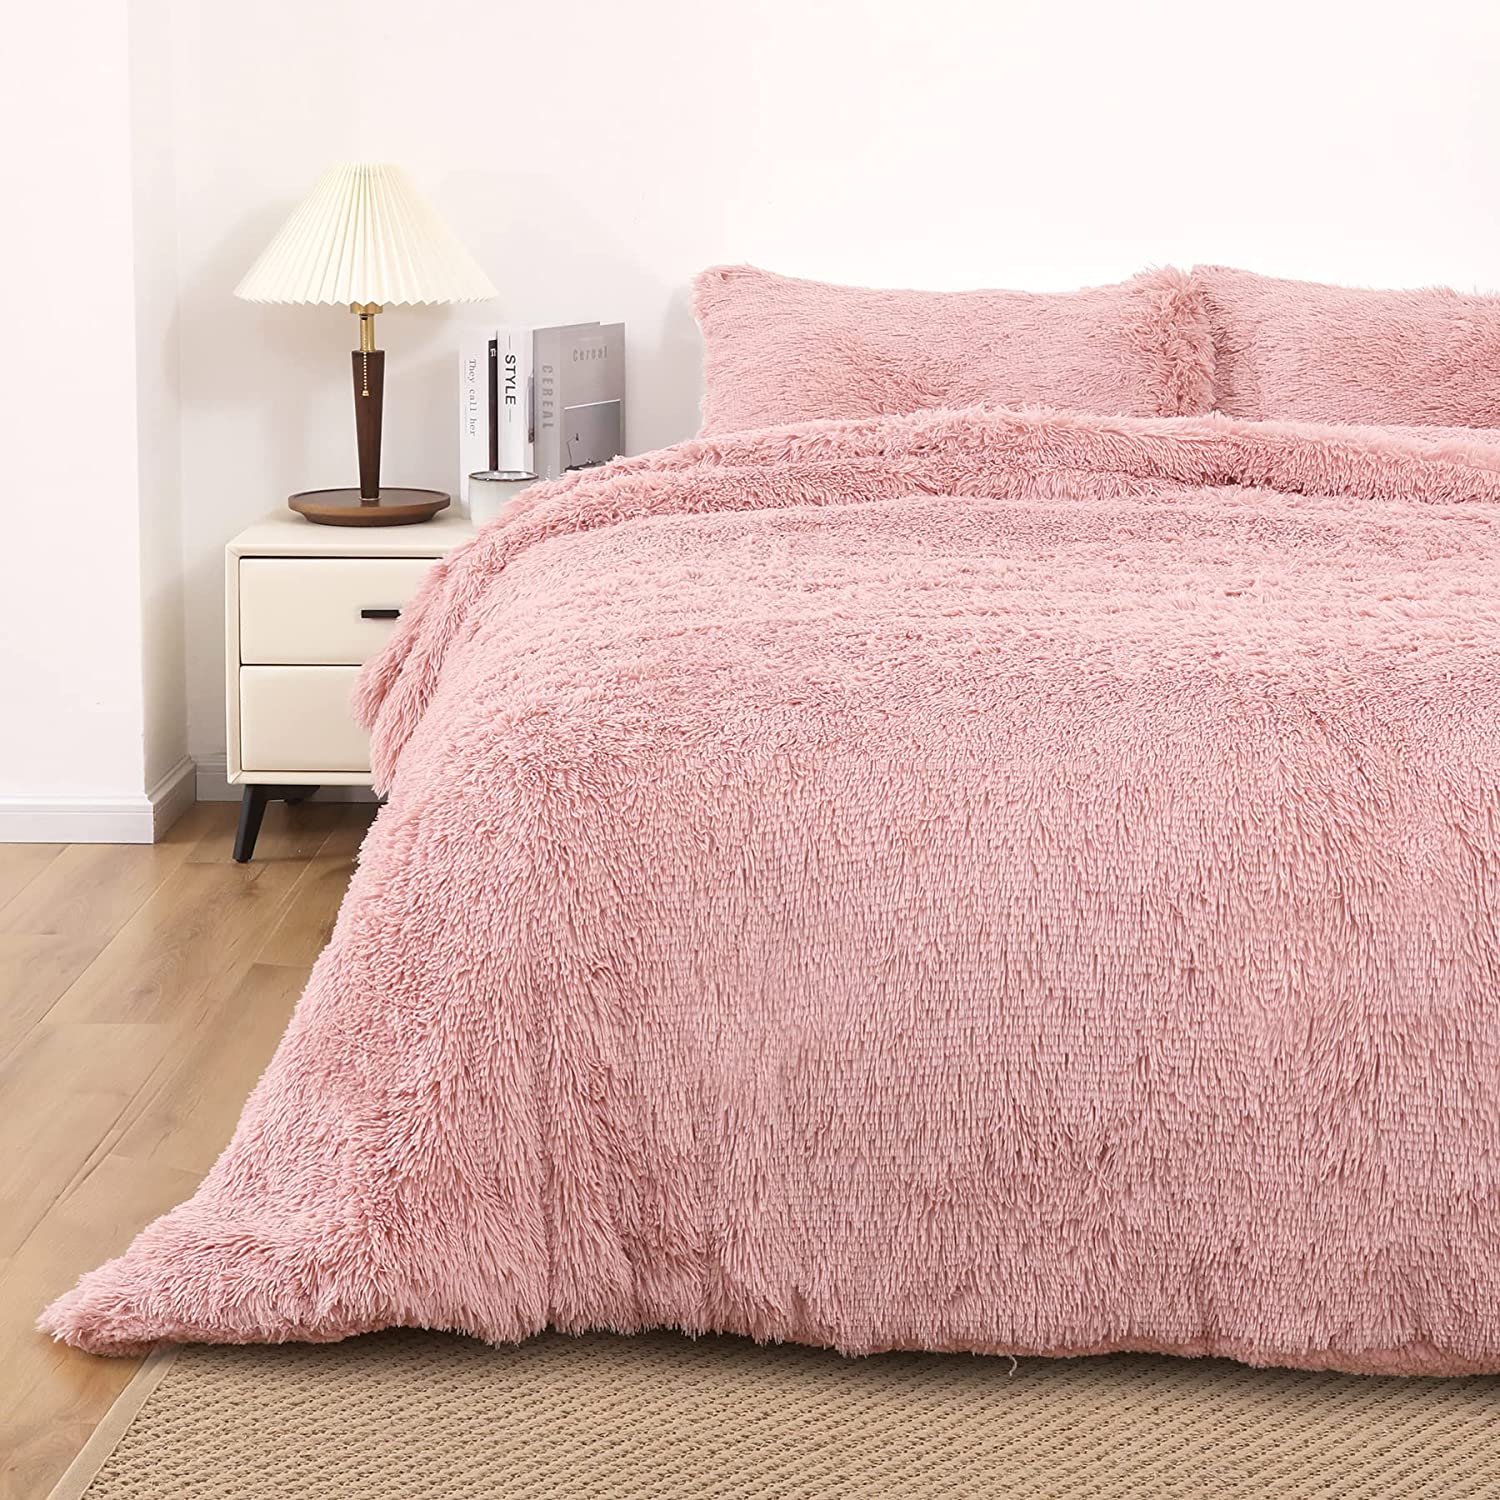 Things You Should Know Before Buying A Faux Fur Reversible Comforter -  PeaceNest Sleep Knowledge Base